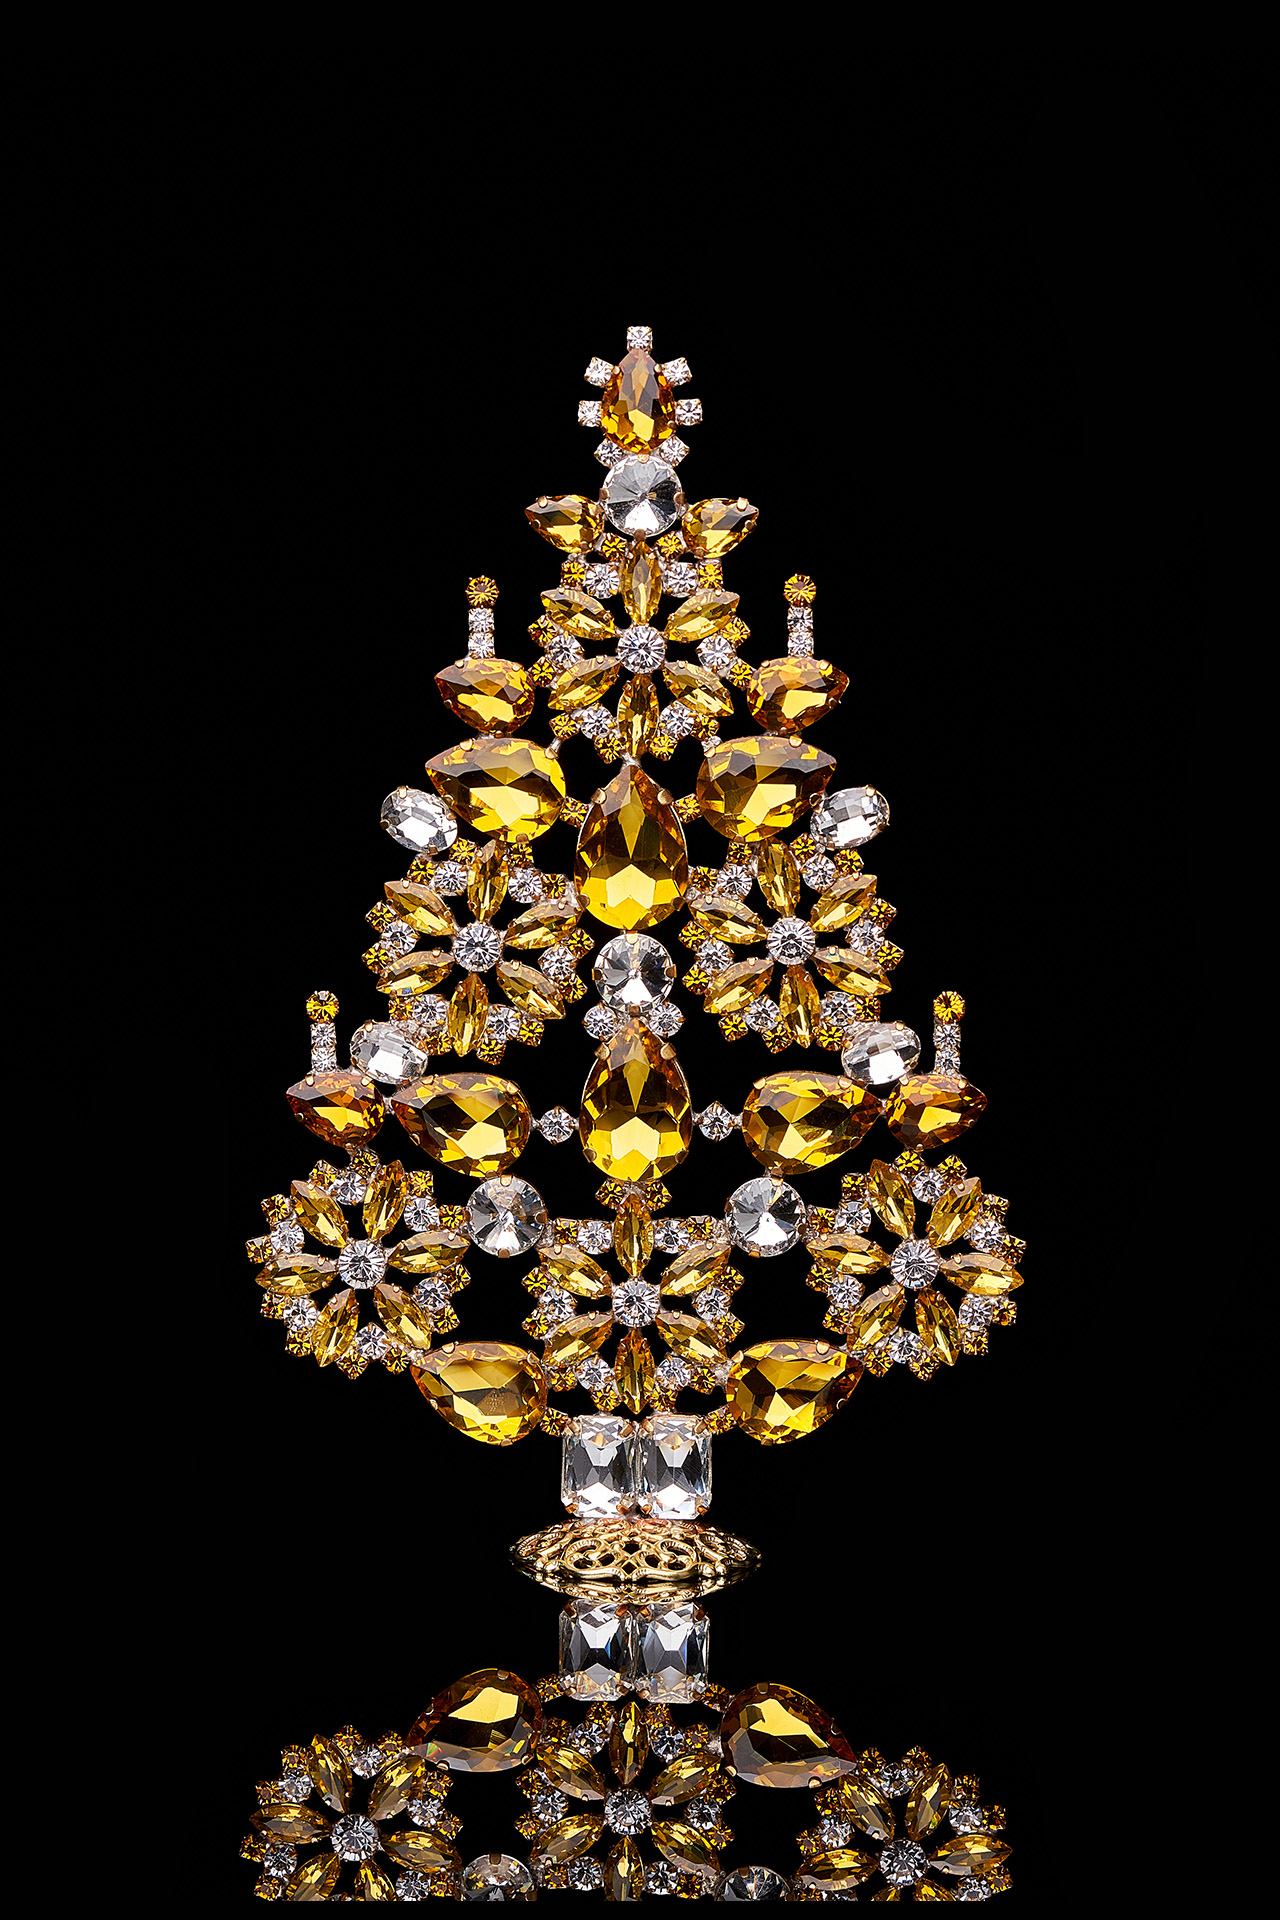 Handcrafted Christmas tree - Topaz crystals